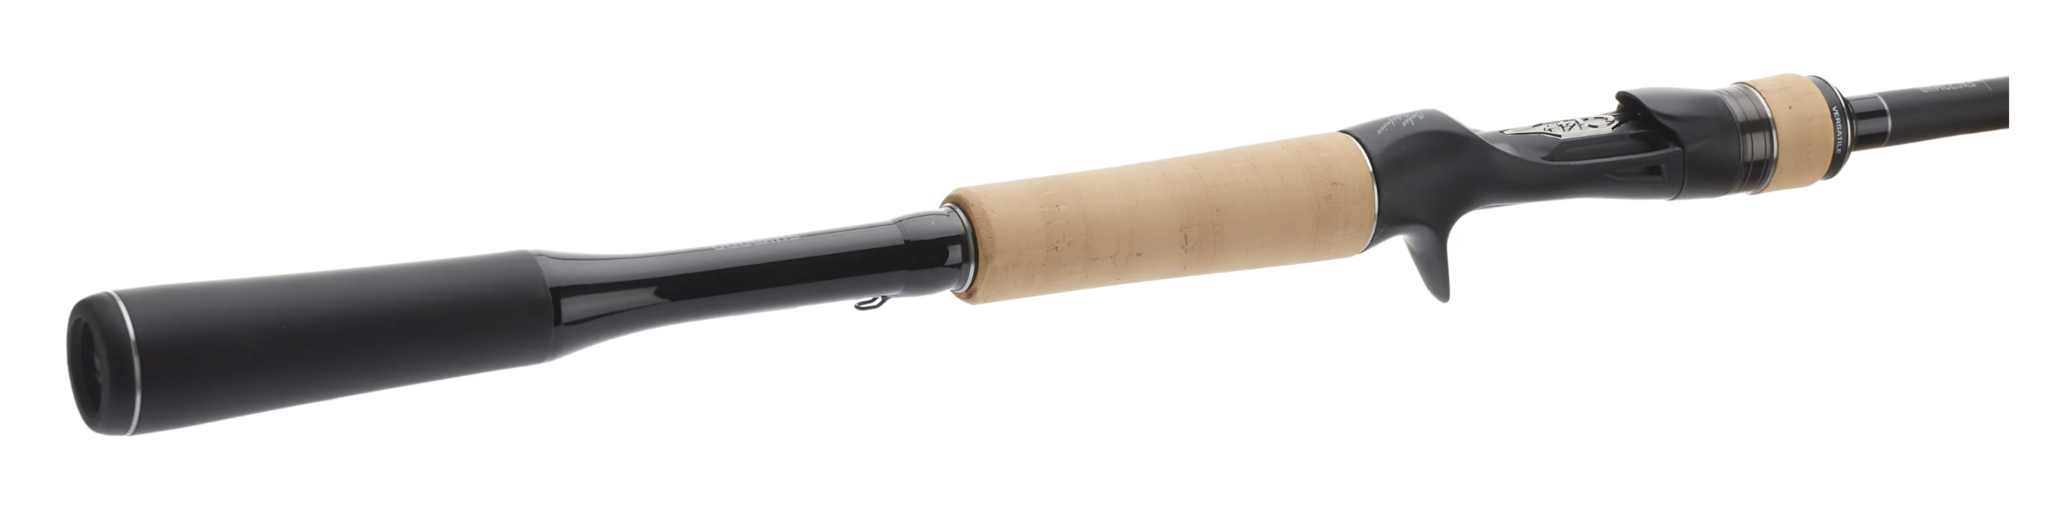 Expride B Casting Rod - Modern Outdoor Tackle